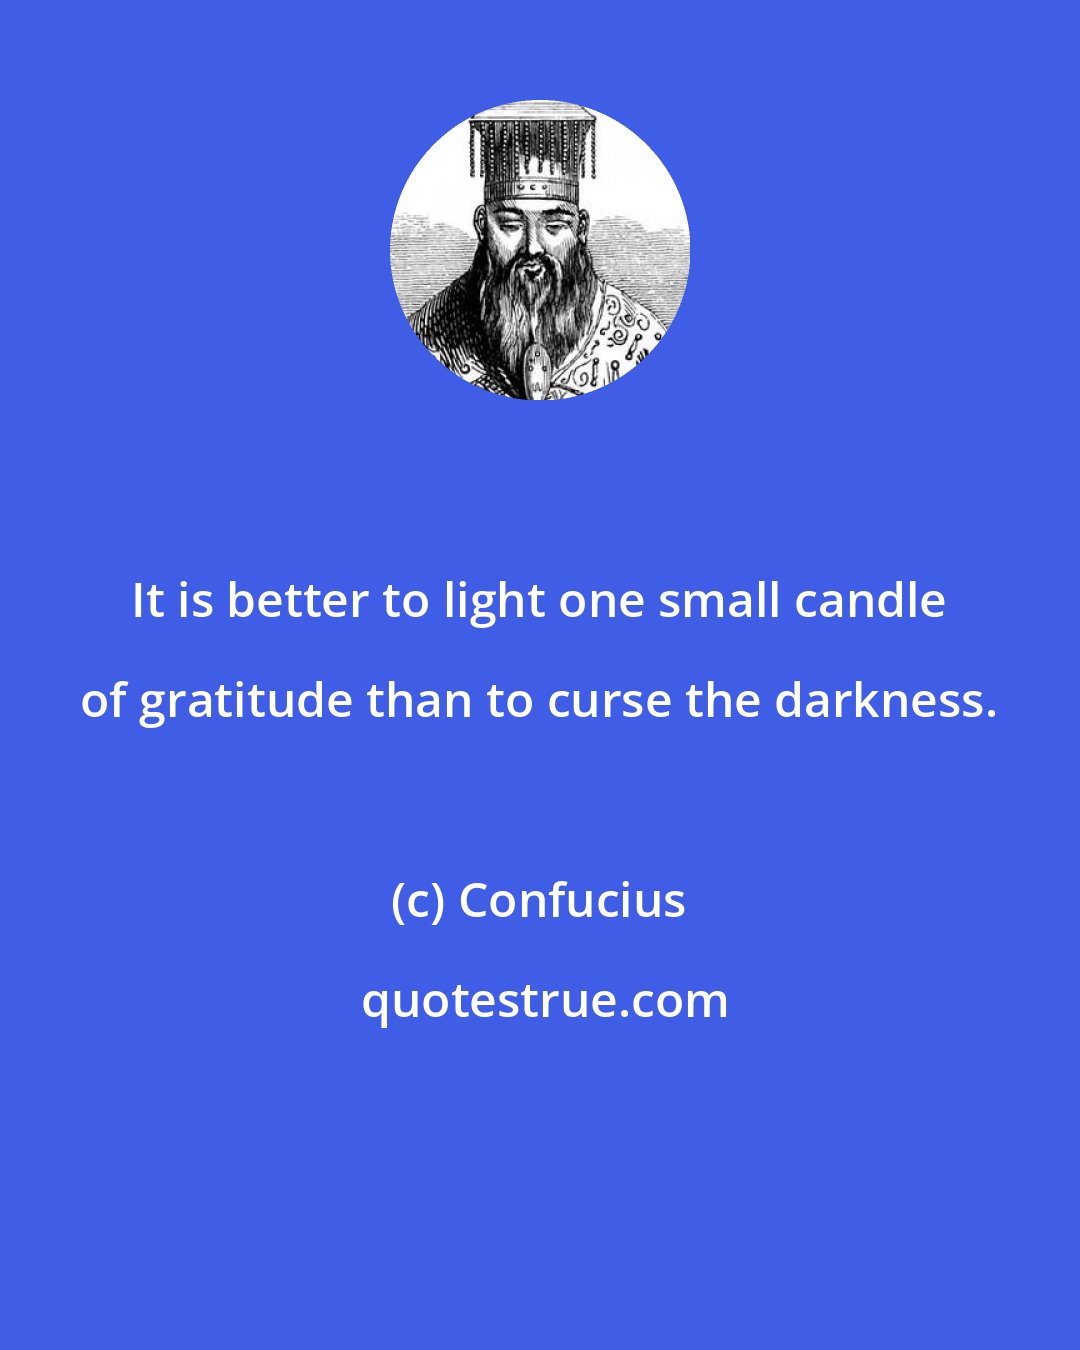 Confucius: It is better to light one small candle of gratitude than to curse the darkness.